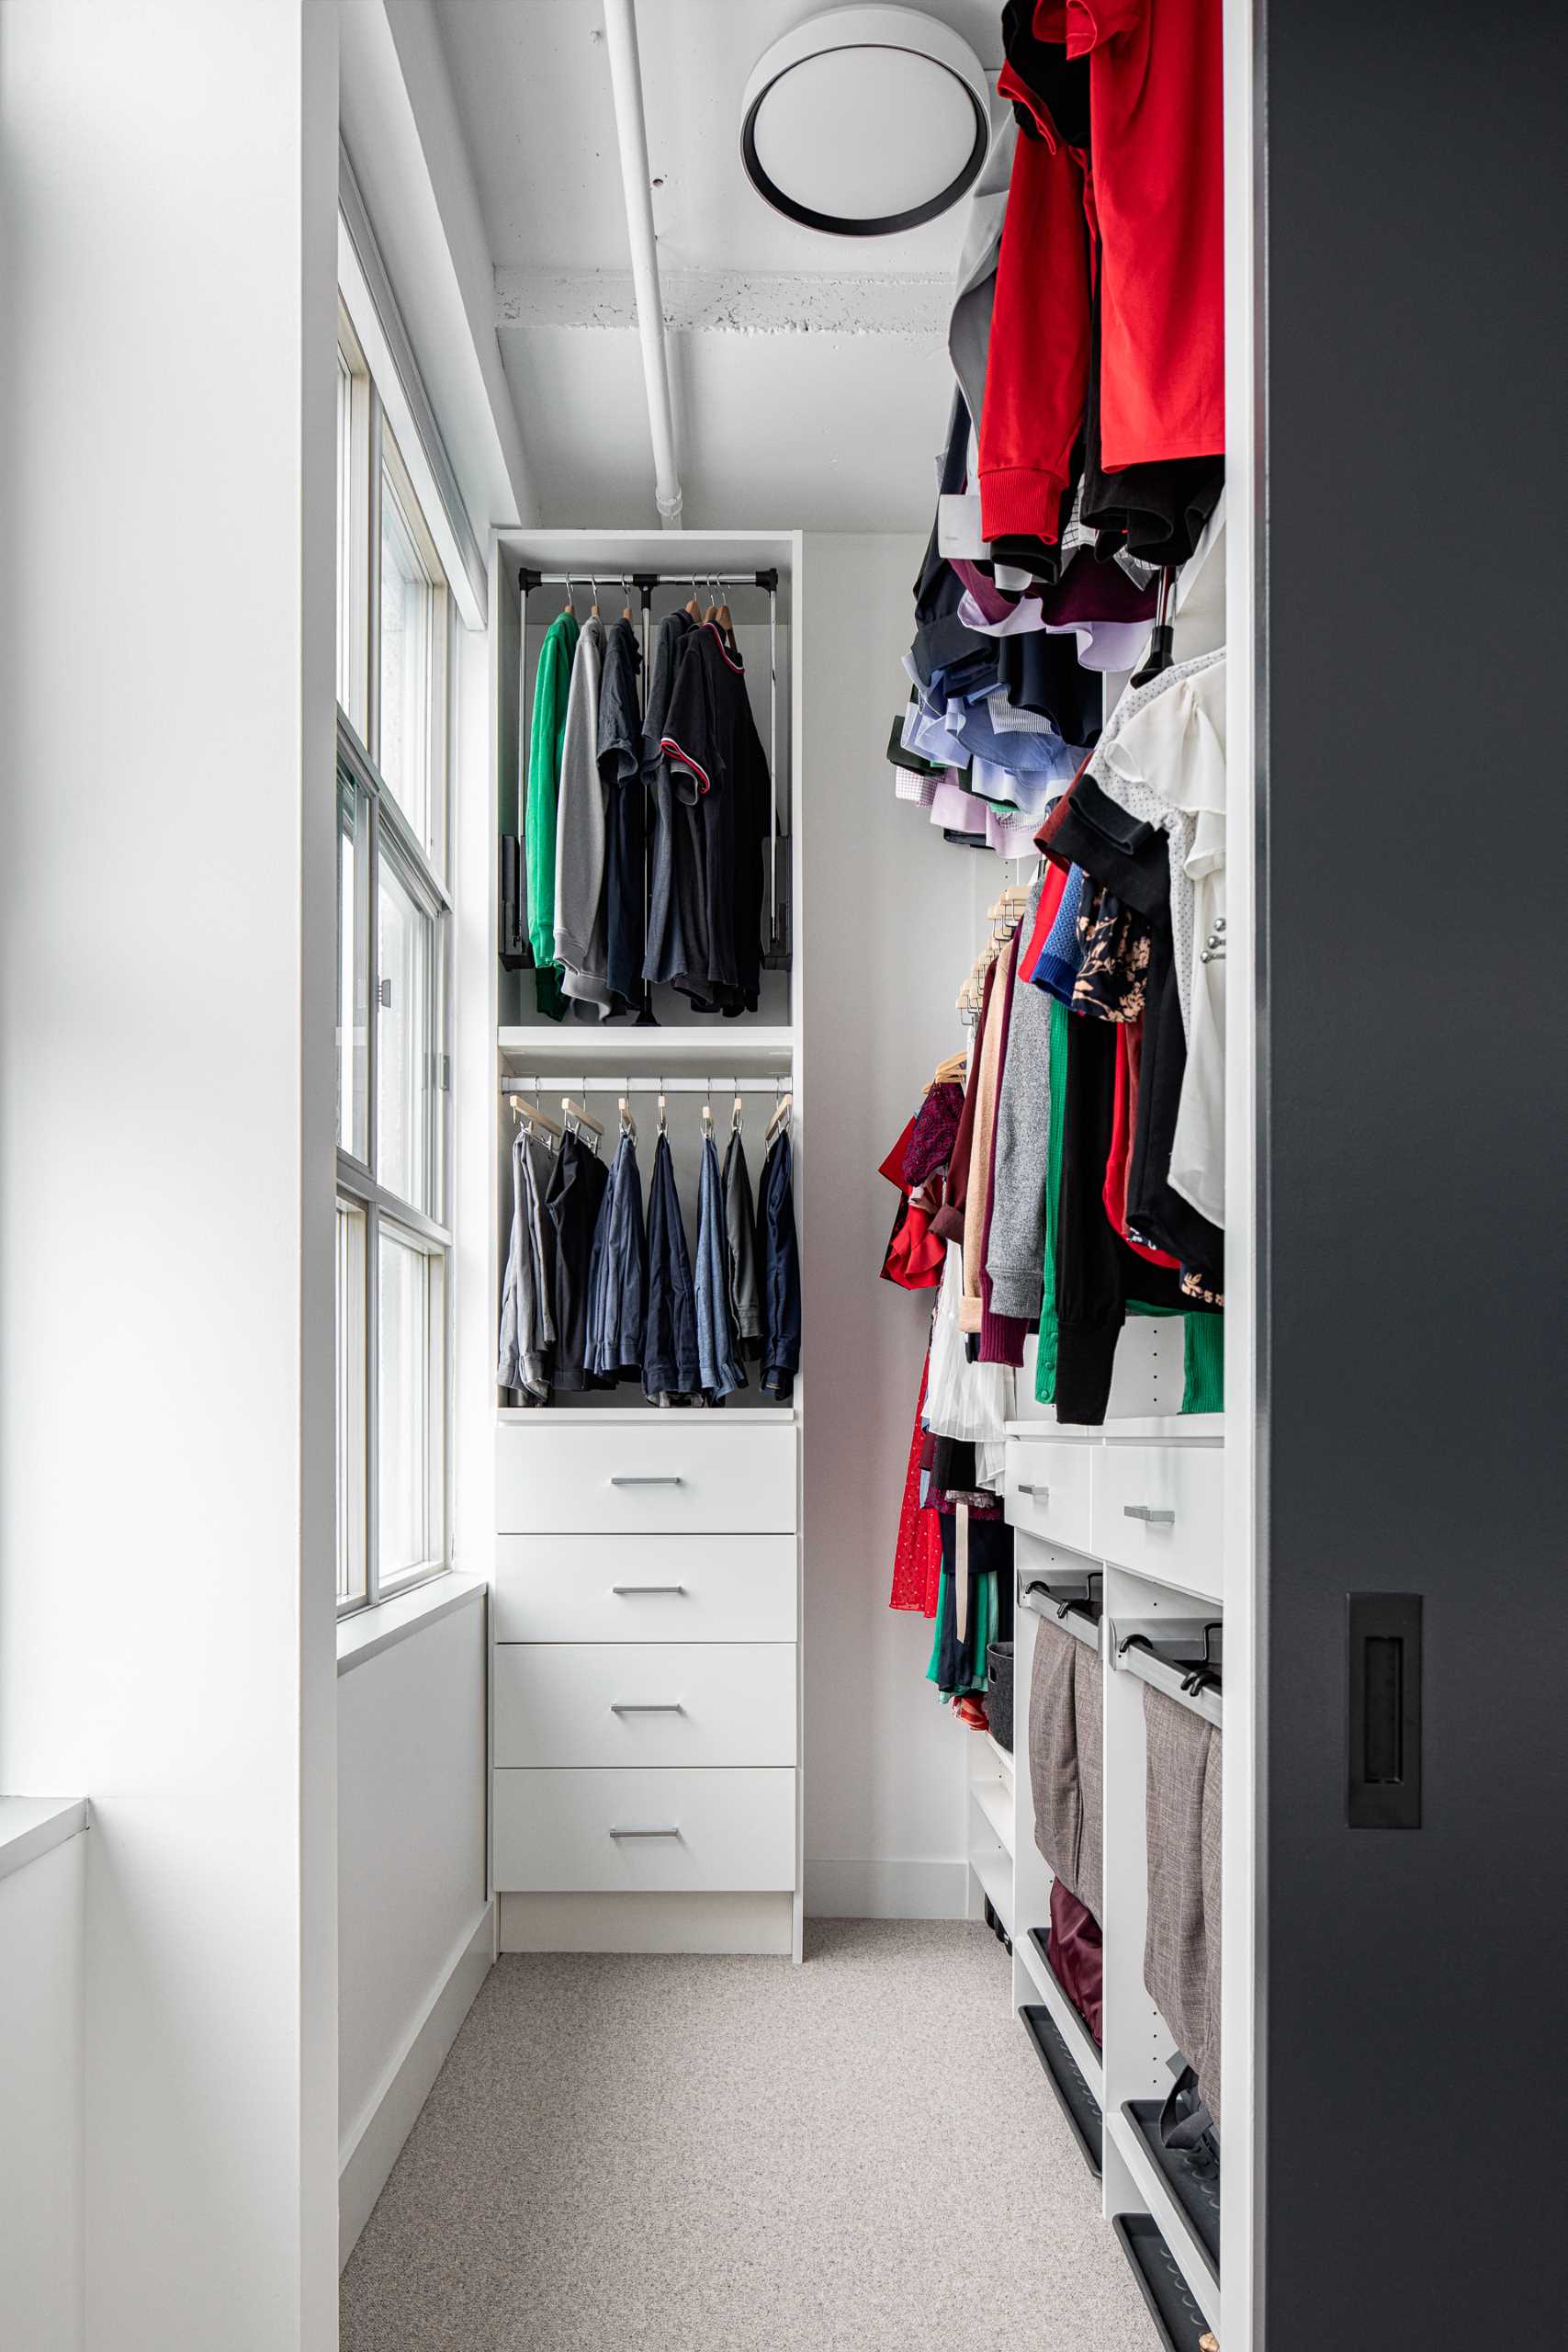 A walk-in closet makes use of the high ceilings to have the most storage space possible.